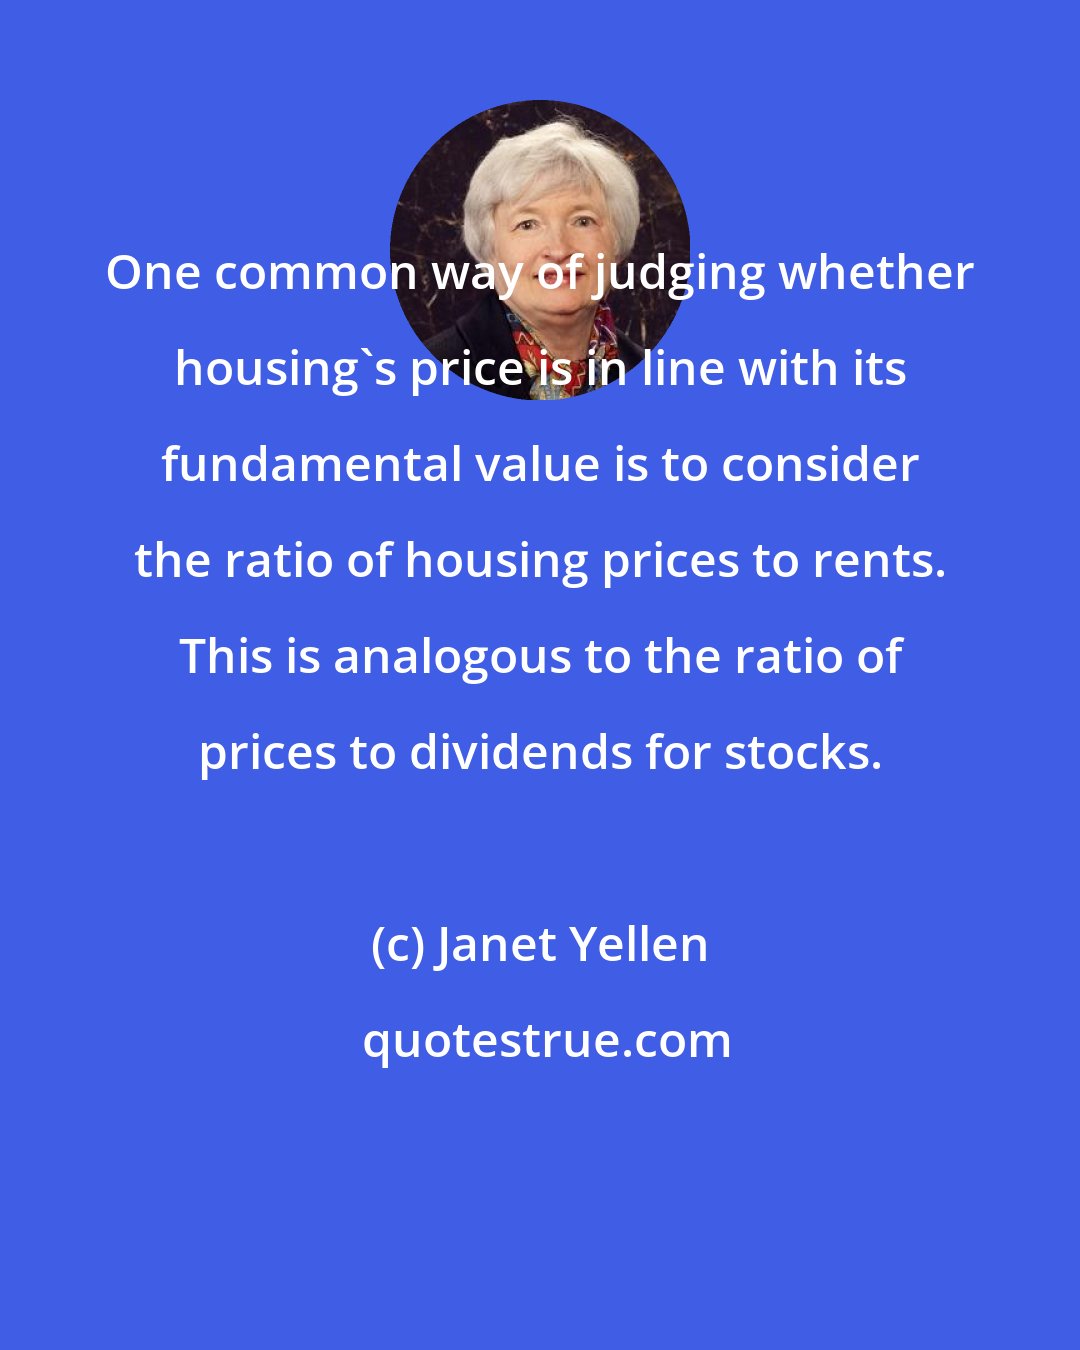 Janet Yellen: One common way of judging whether housing's price is in line with its fundamental value is to consider the ratio of housing prices to rents. This is analogous to the ratio of prices to dividends for stocks.